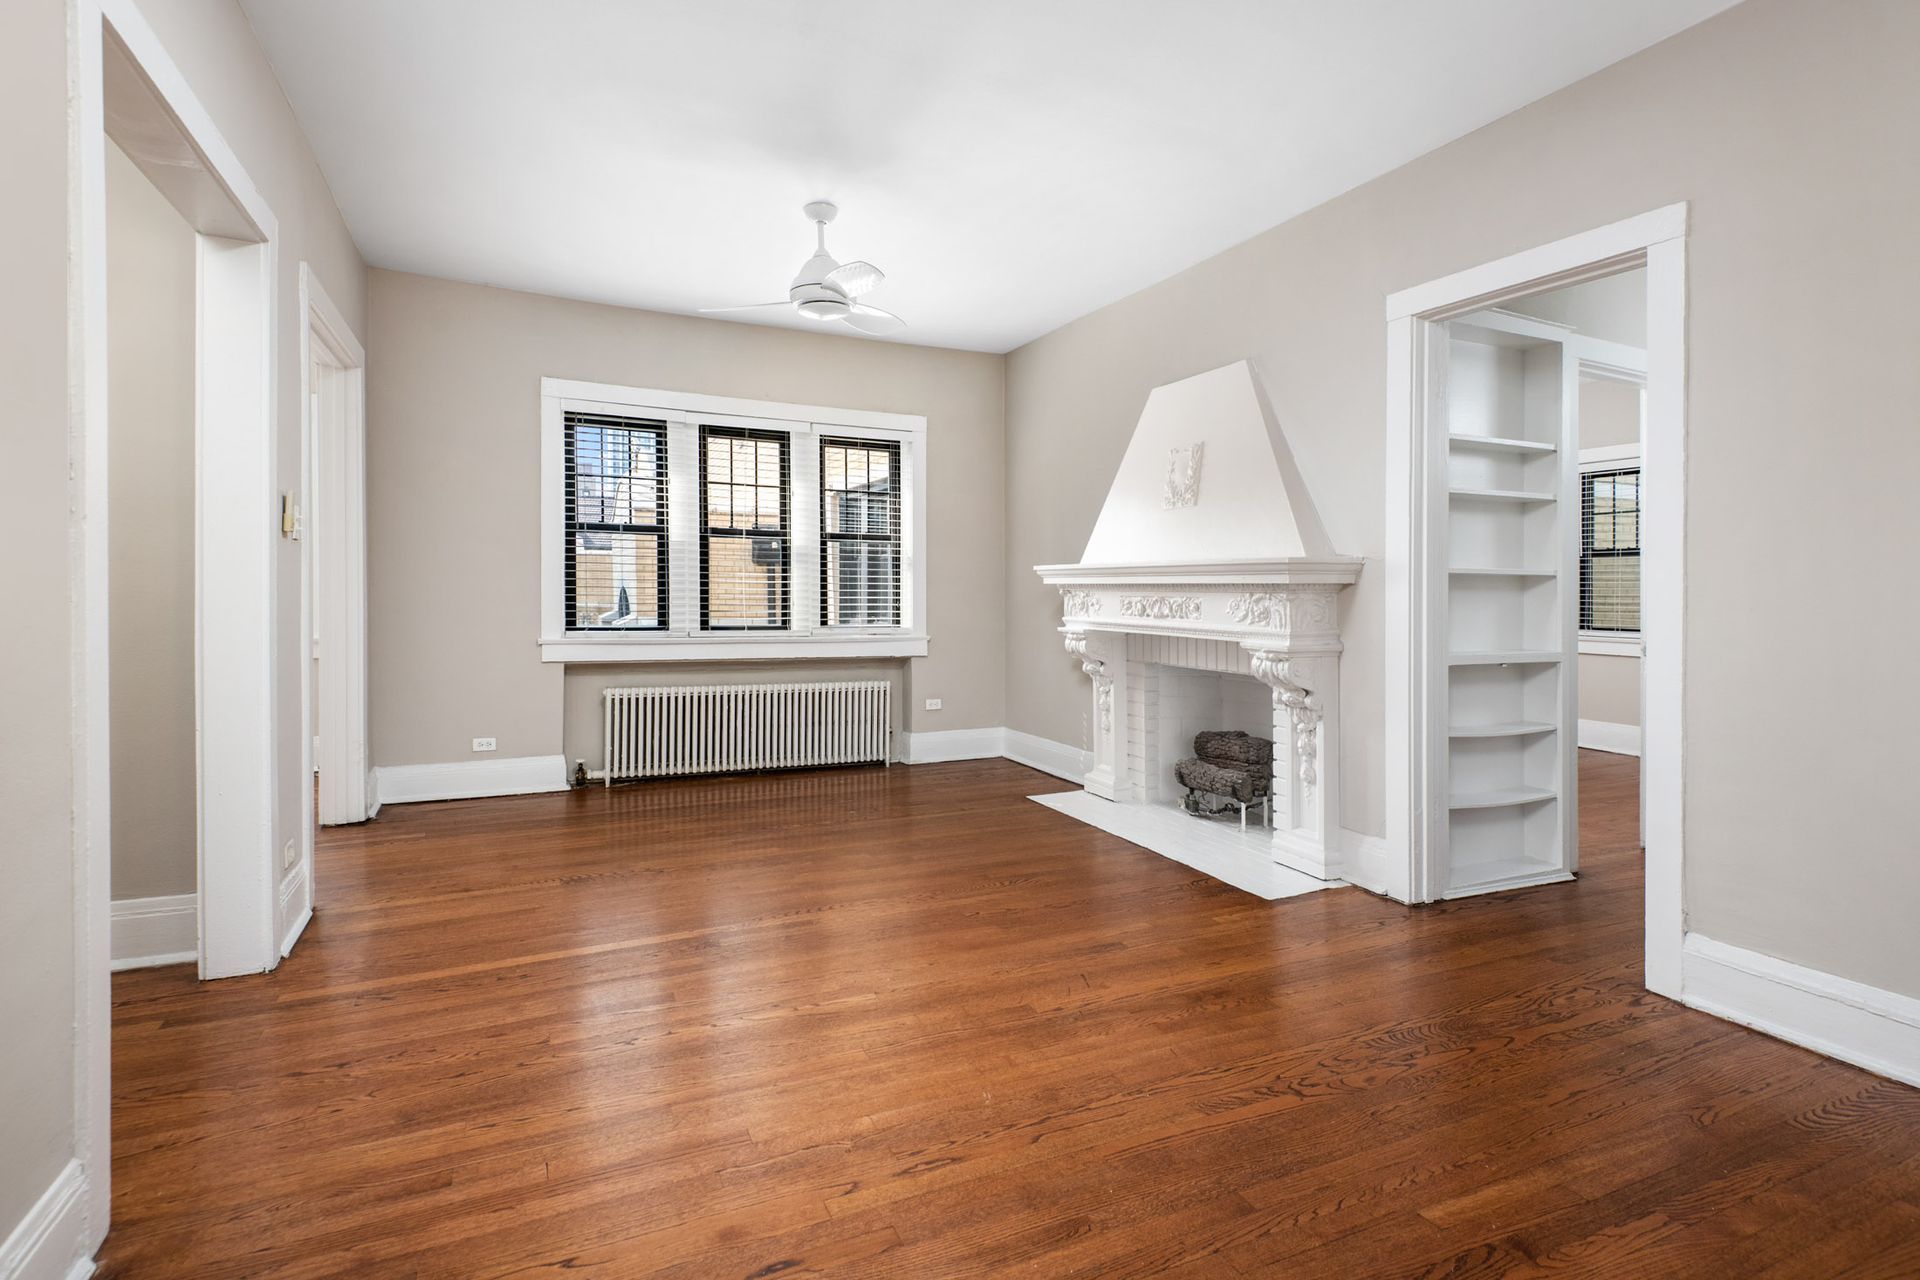 An empty living room with hardwood floors, windows, and a fireplace.